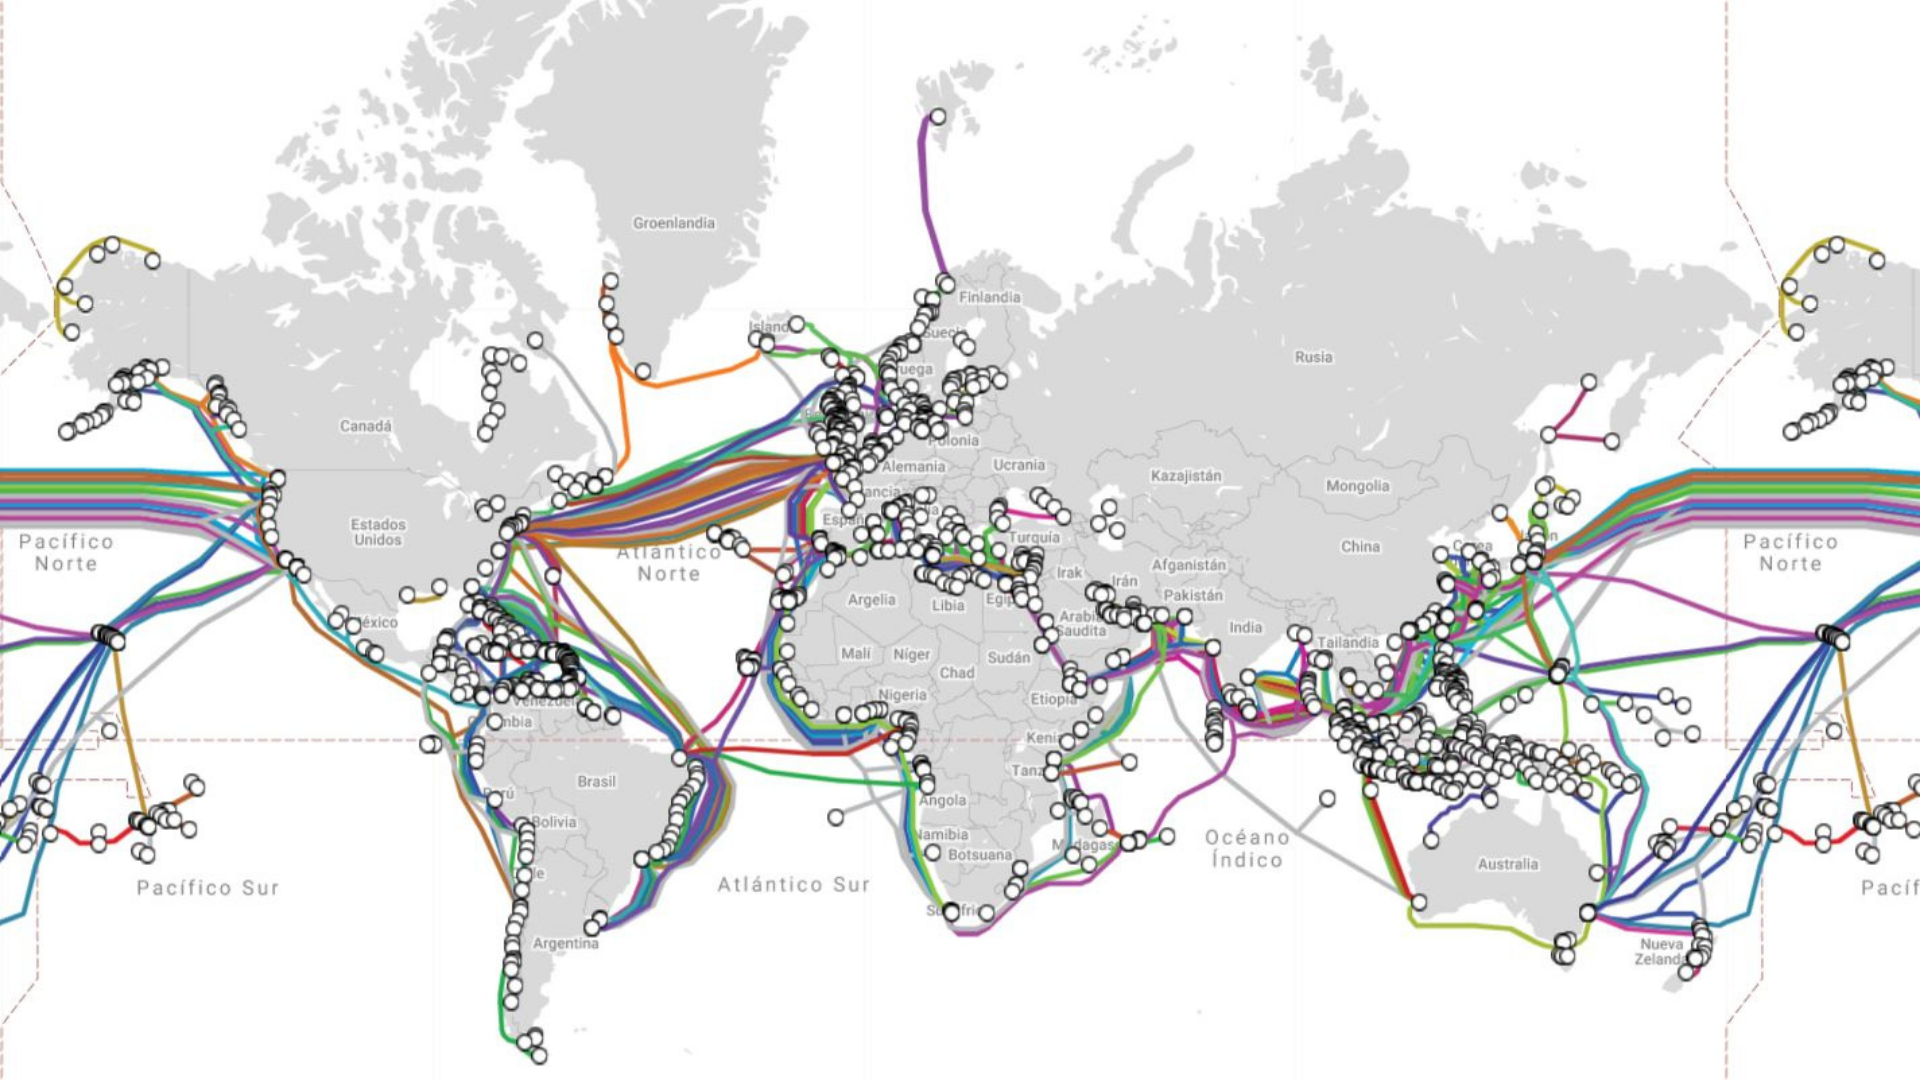 Current map of submarine cables in the world, about 430 in total.